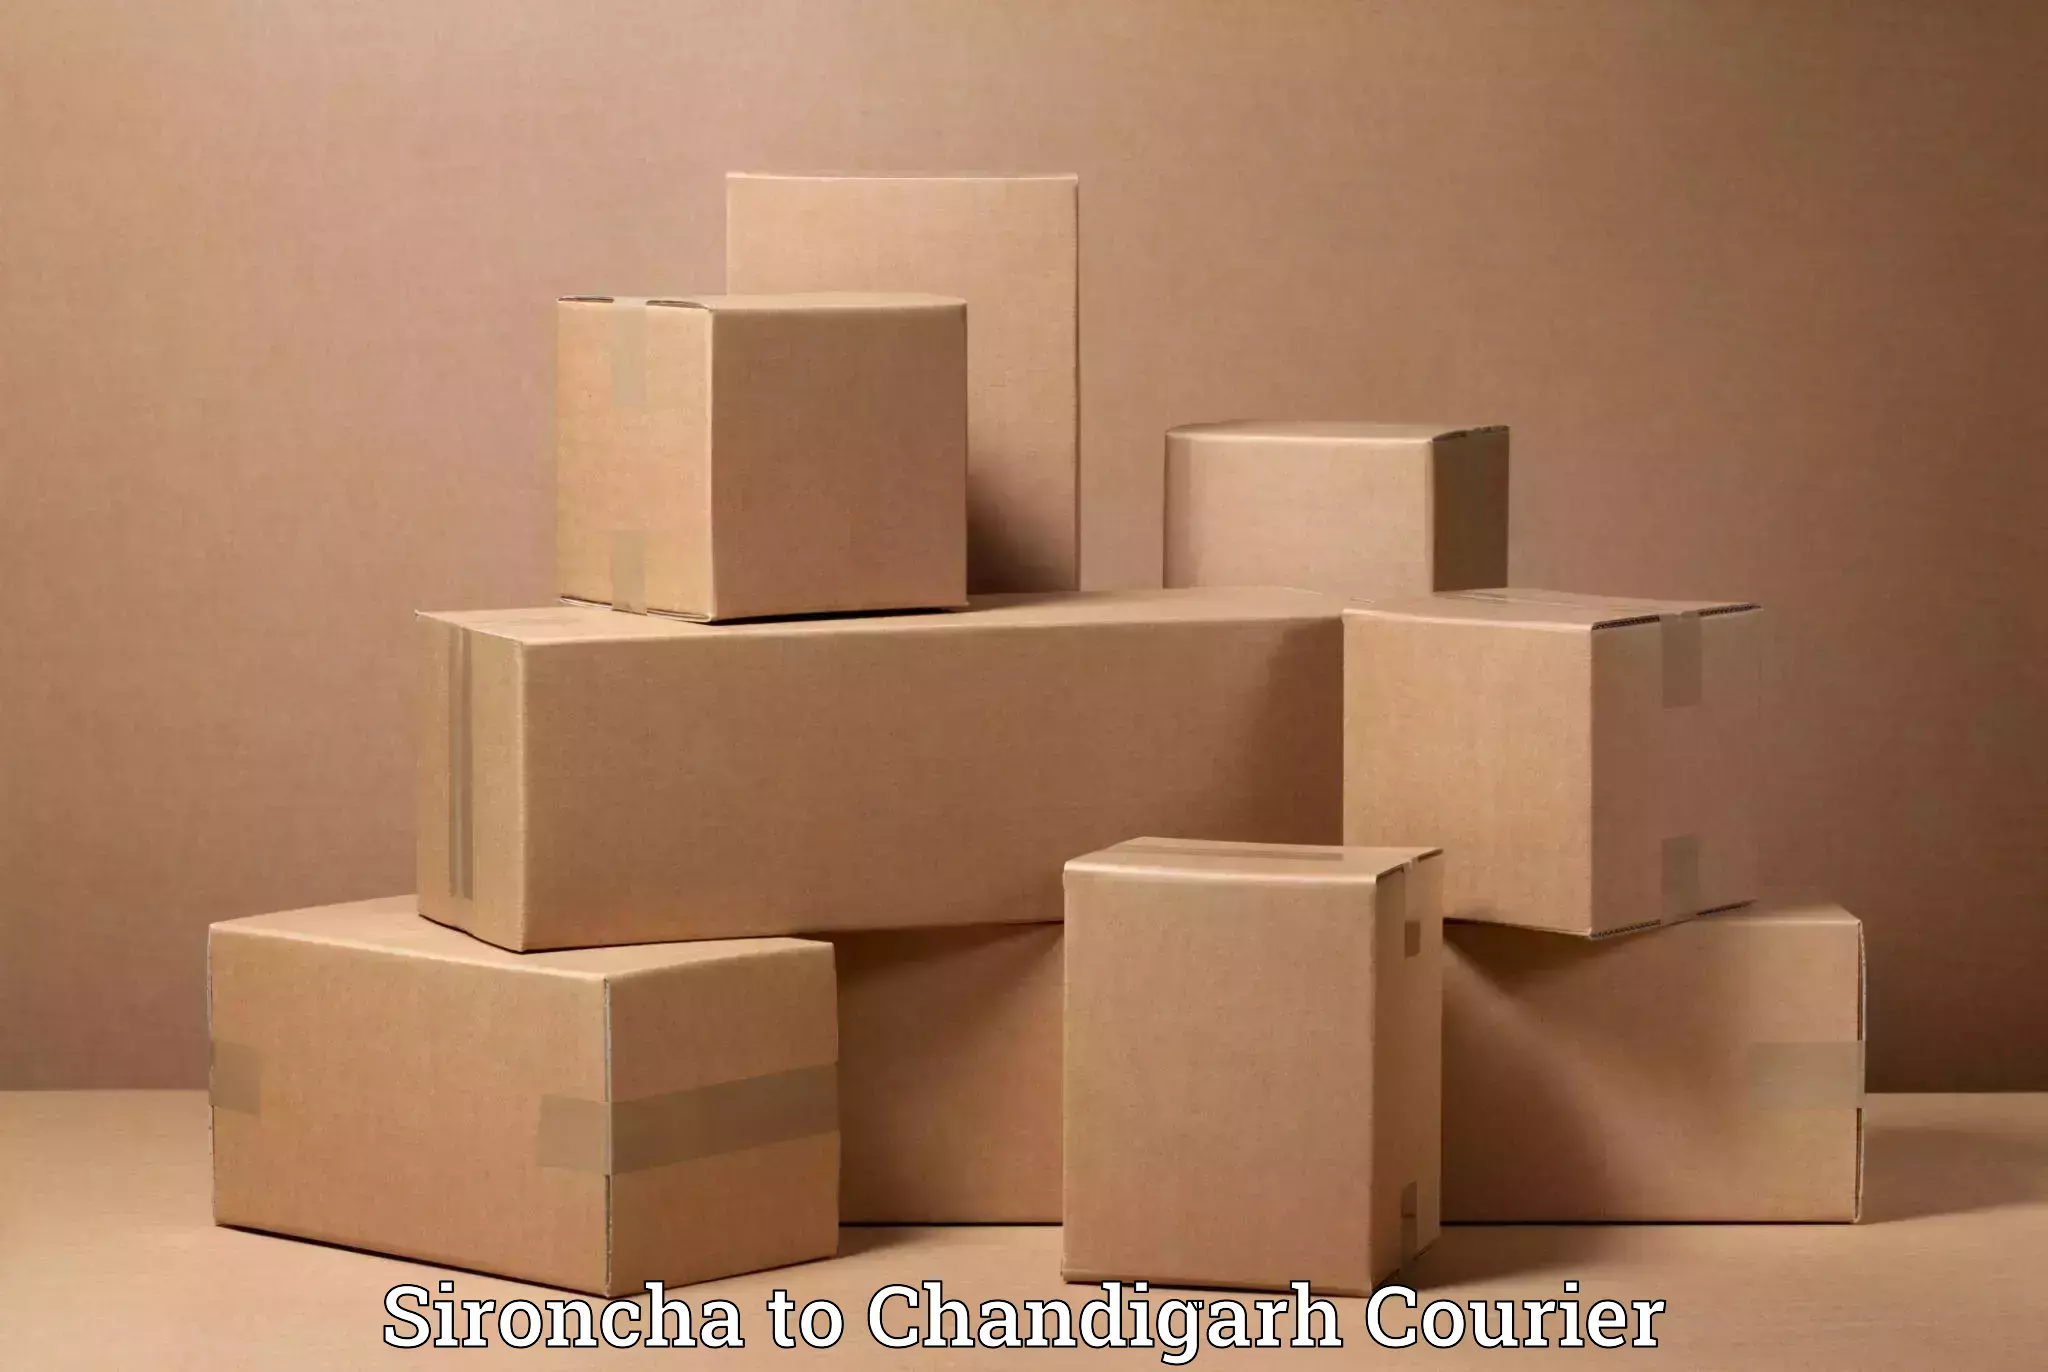 Furniture moving experts Sironcha to Chandigarh